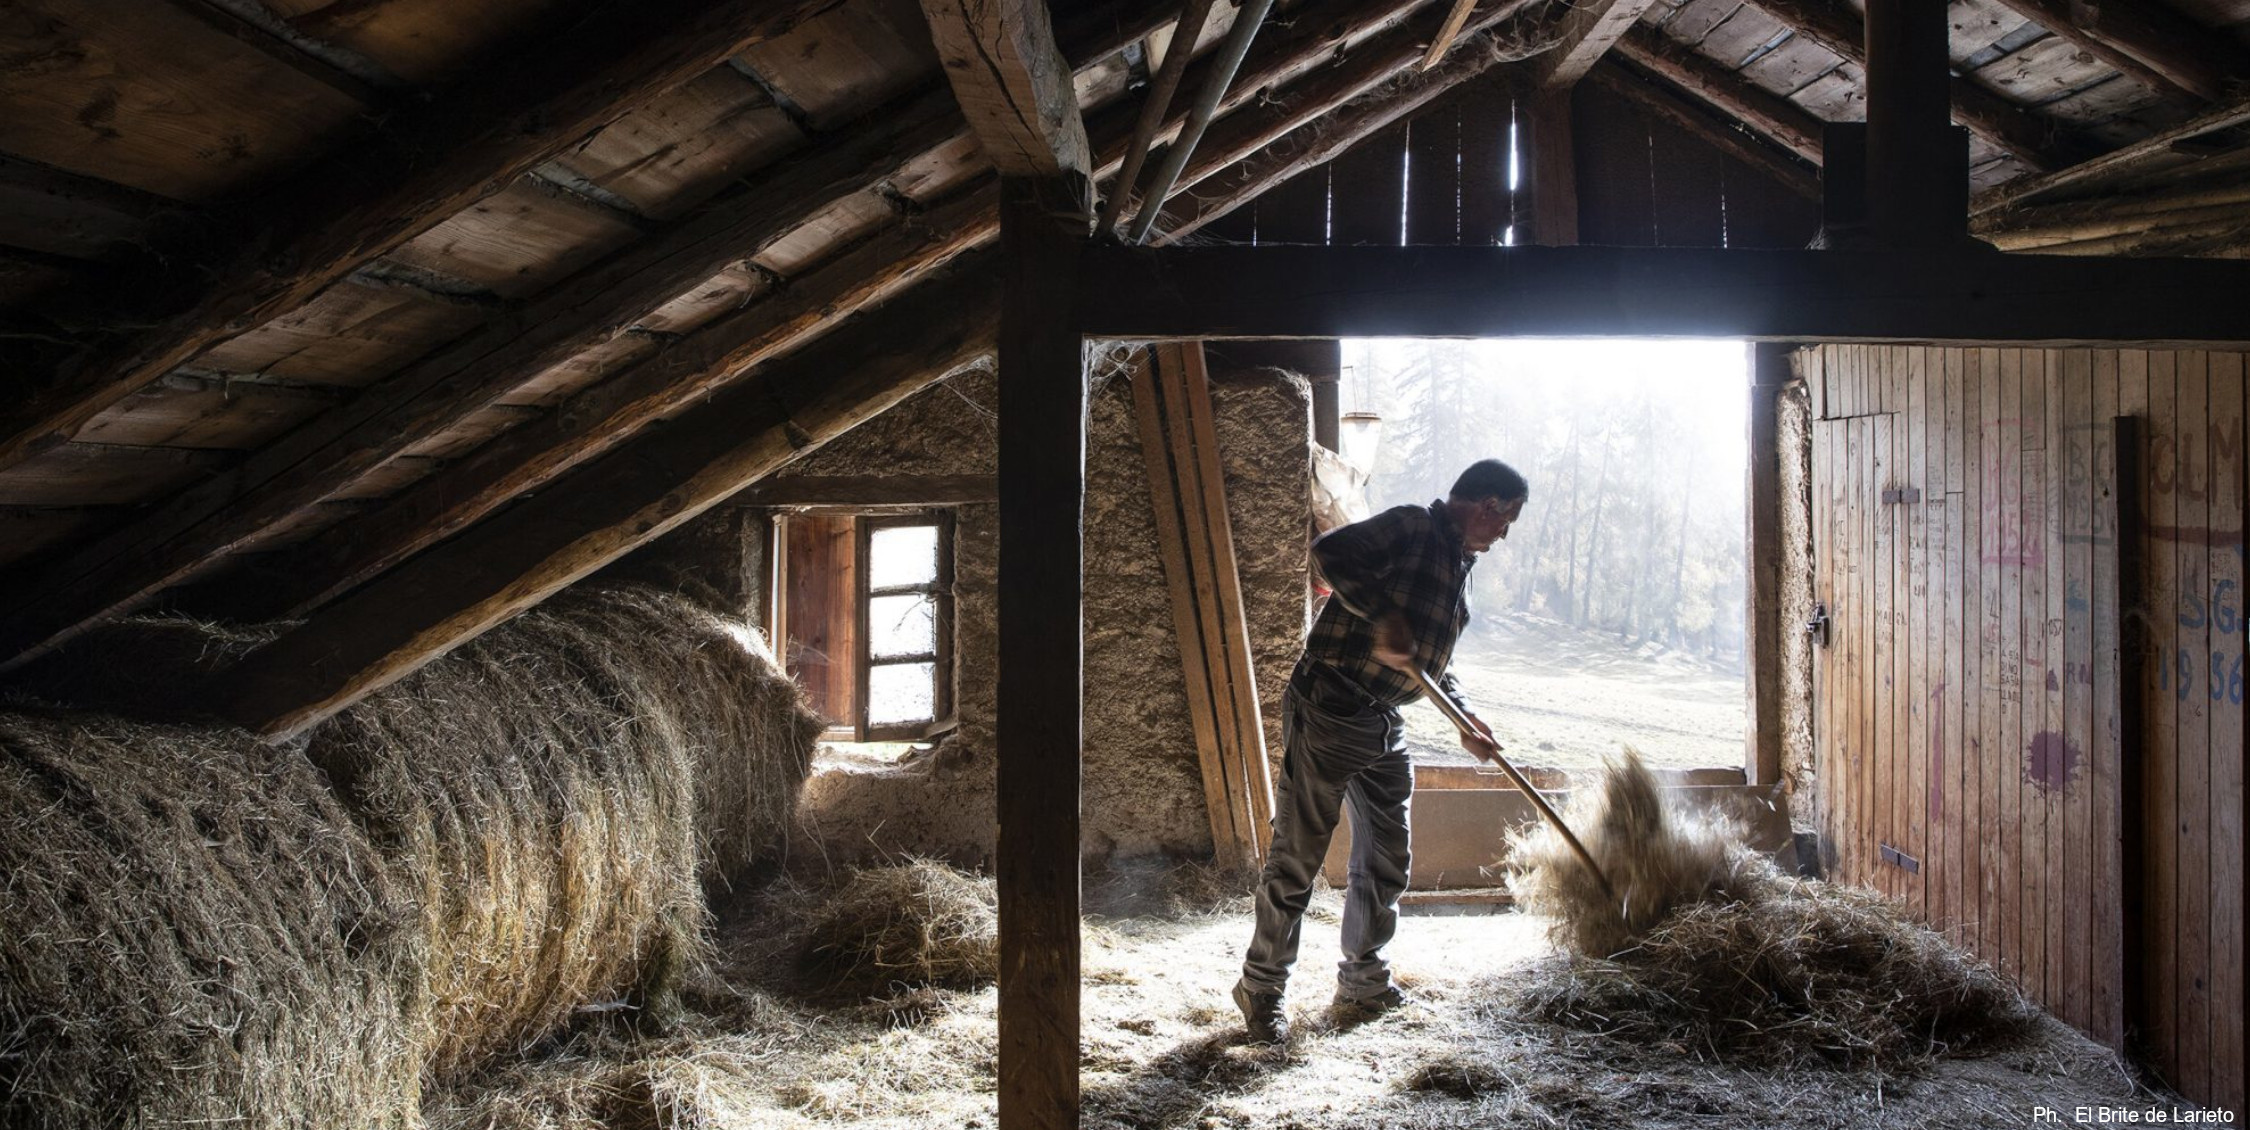 Quality producers and products in the UNESCO Dolomites. Pictured: work in a barn.